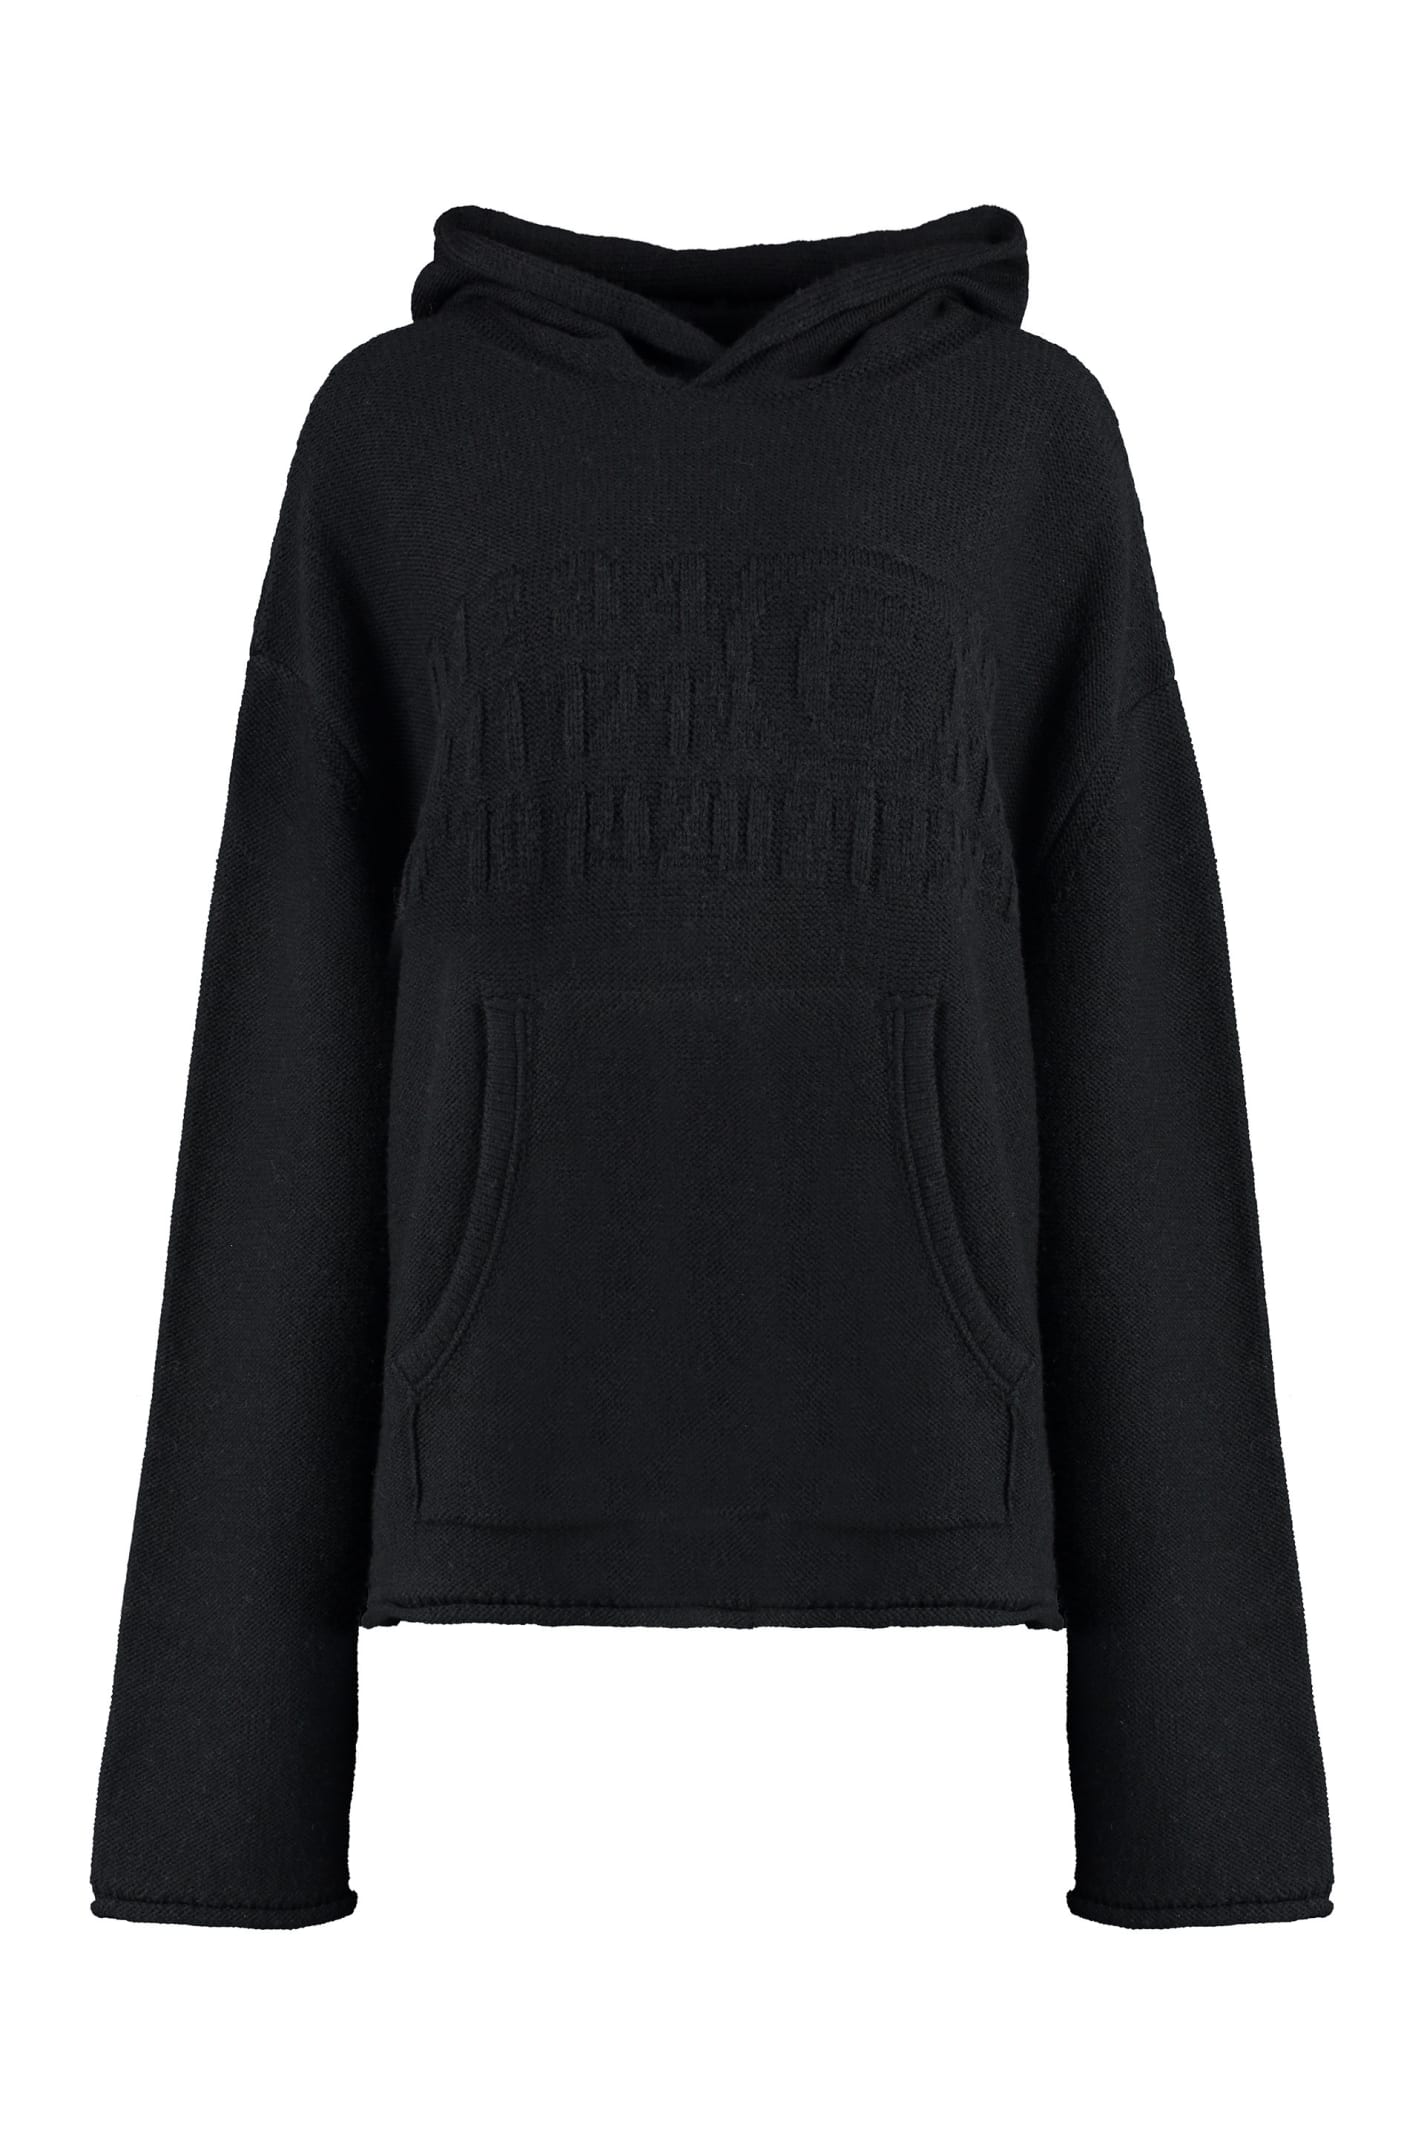 MM6 MAISON MARGIELA KNITTED HOODIE